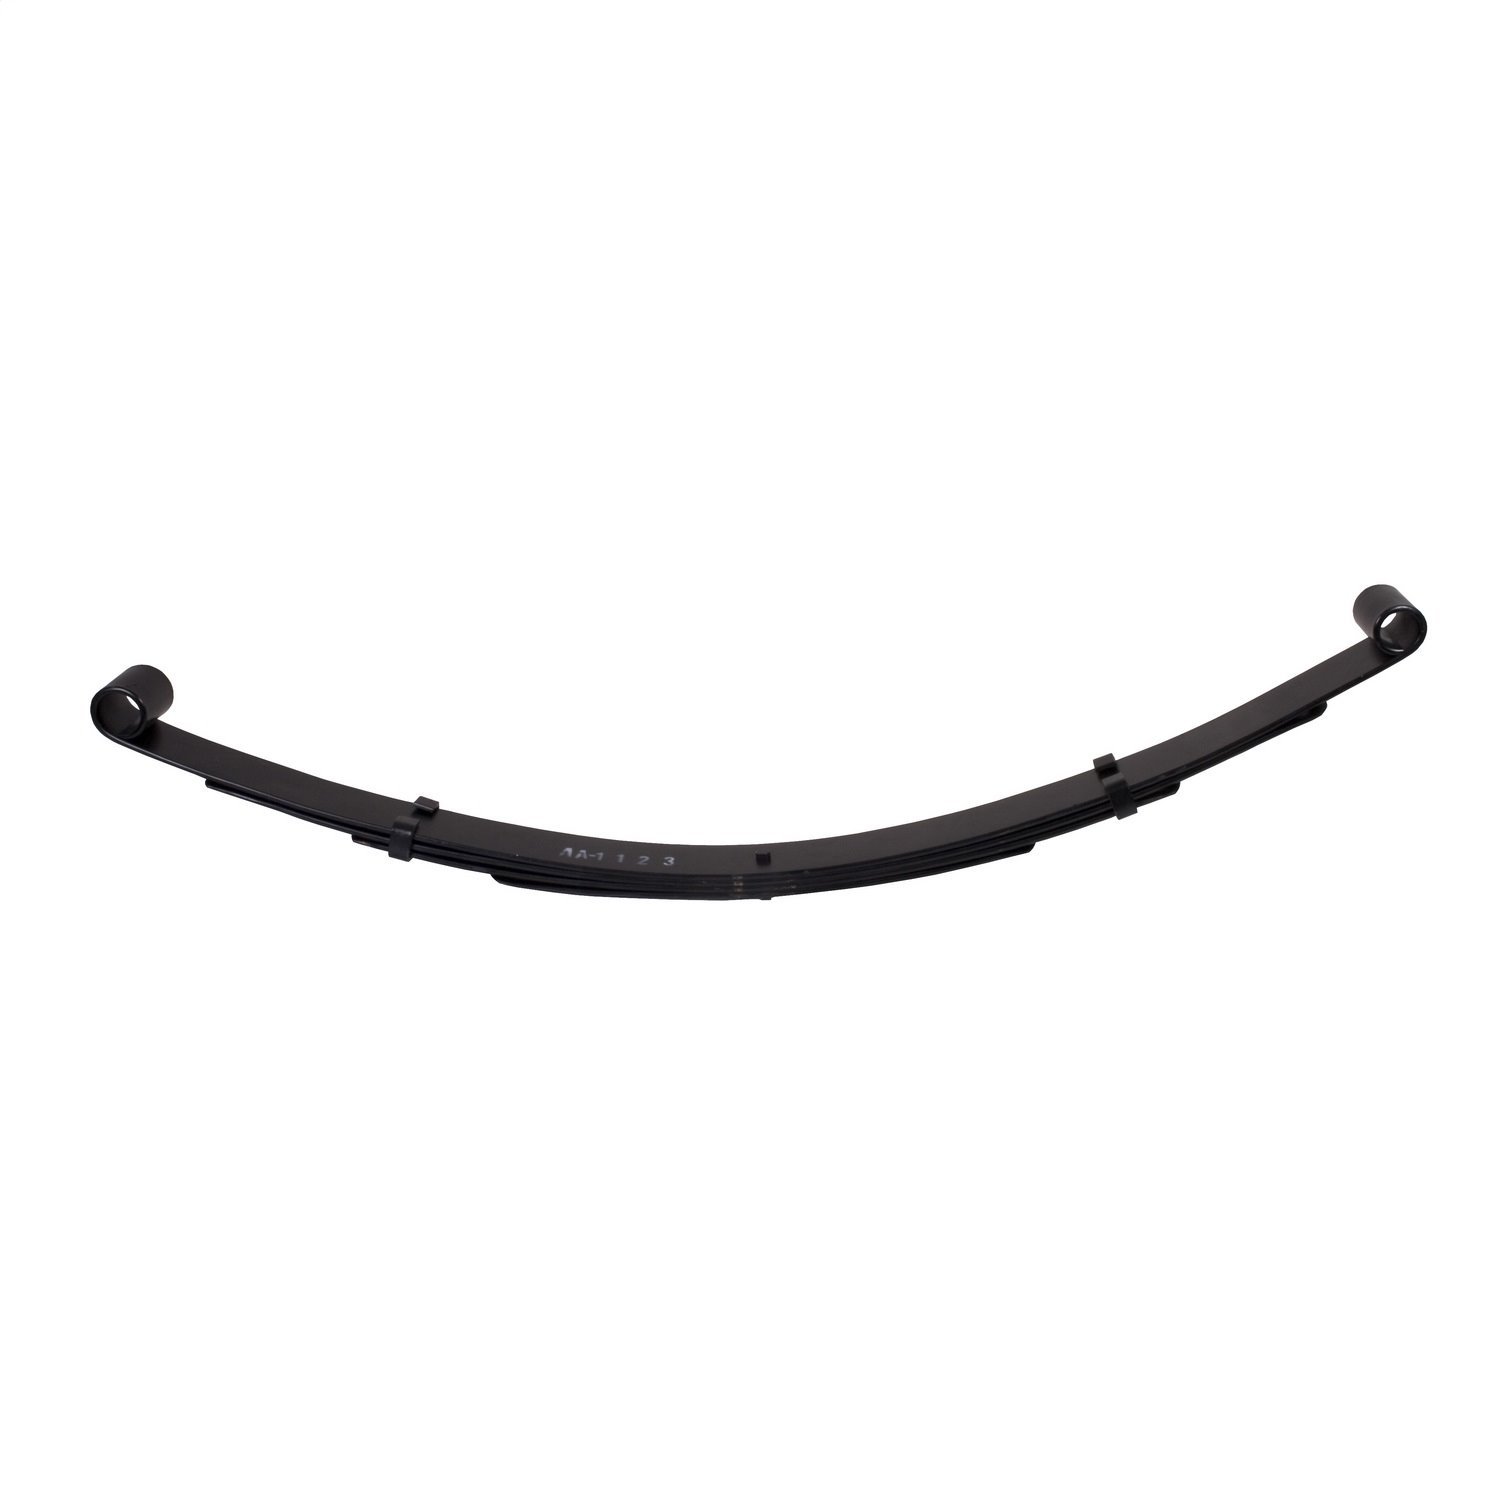 Stock replacement 4-leaf front spring from Omix-ADA, Fits 87-95 Jeep Wrangler YJis only o